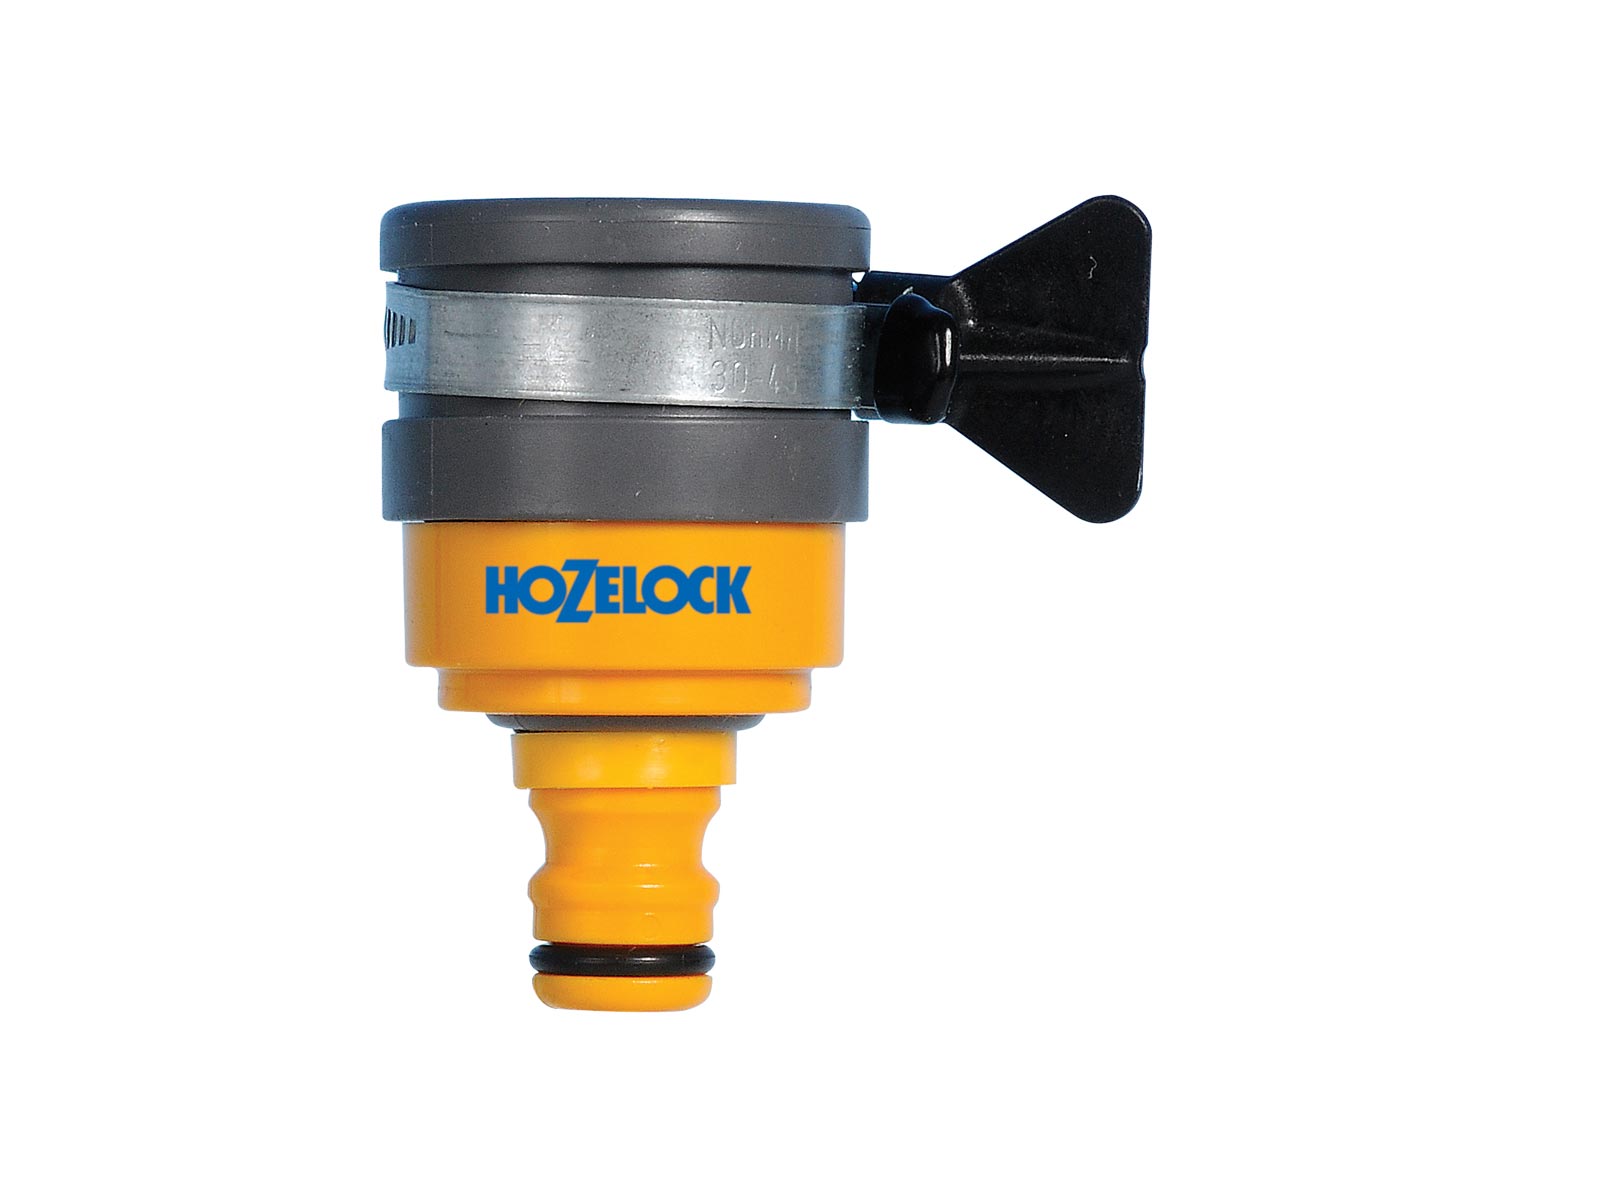 Details about   Hozelock Fitting for Round or Oval Faucets 18mm adapter Mixing Valve show original title